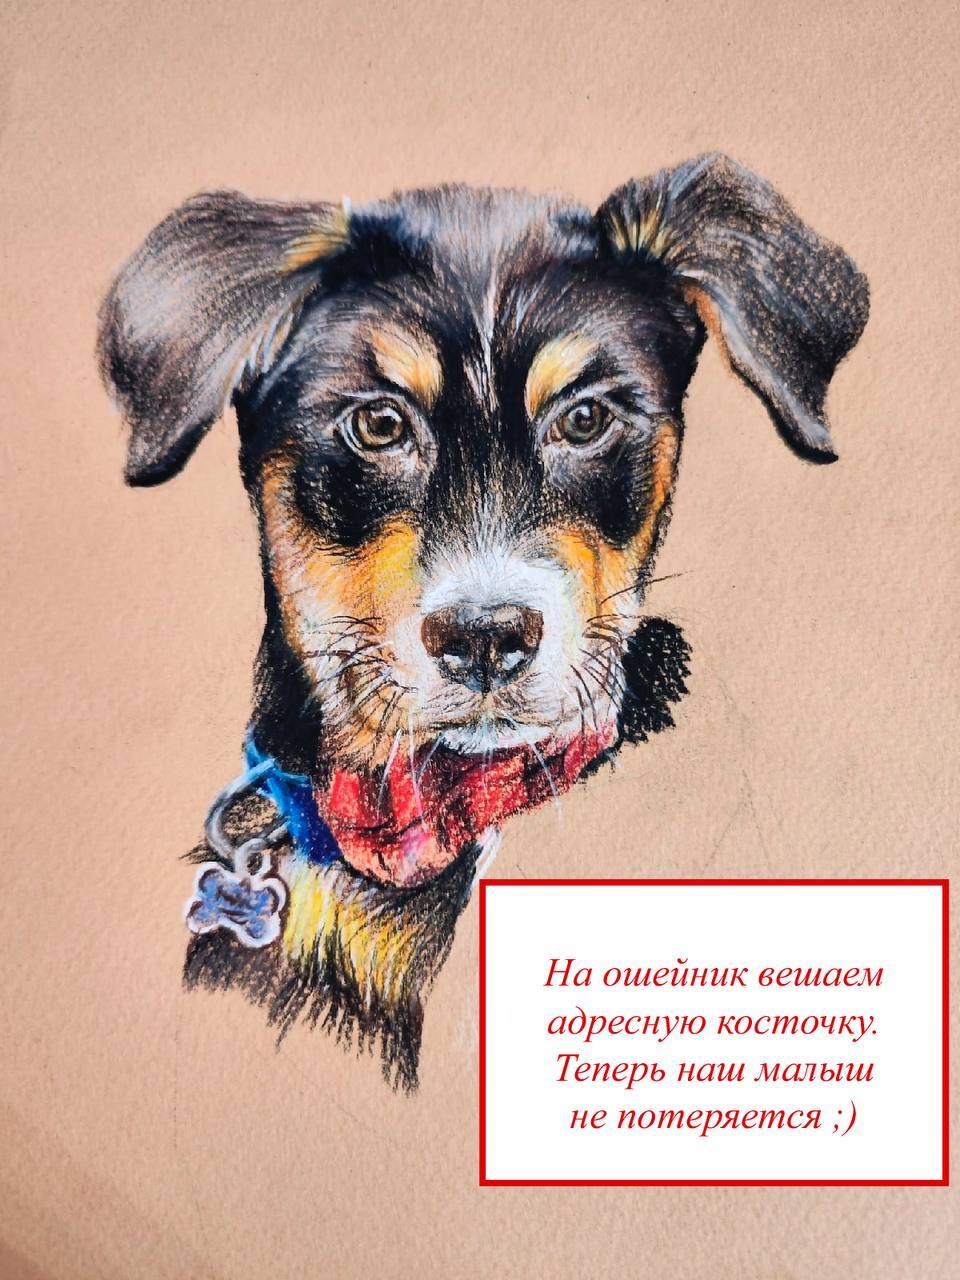 Lesson 3 - My, Drawing lessons, Colour pencils, Drawing, Art, Dog, Longpost